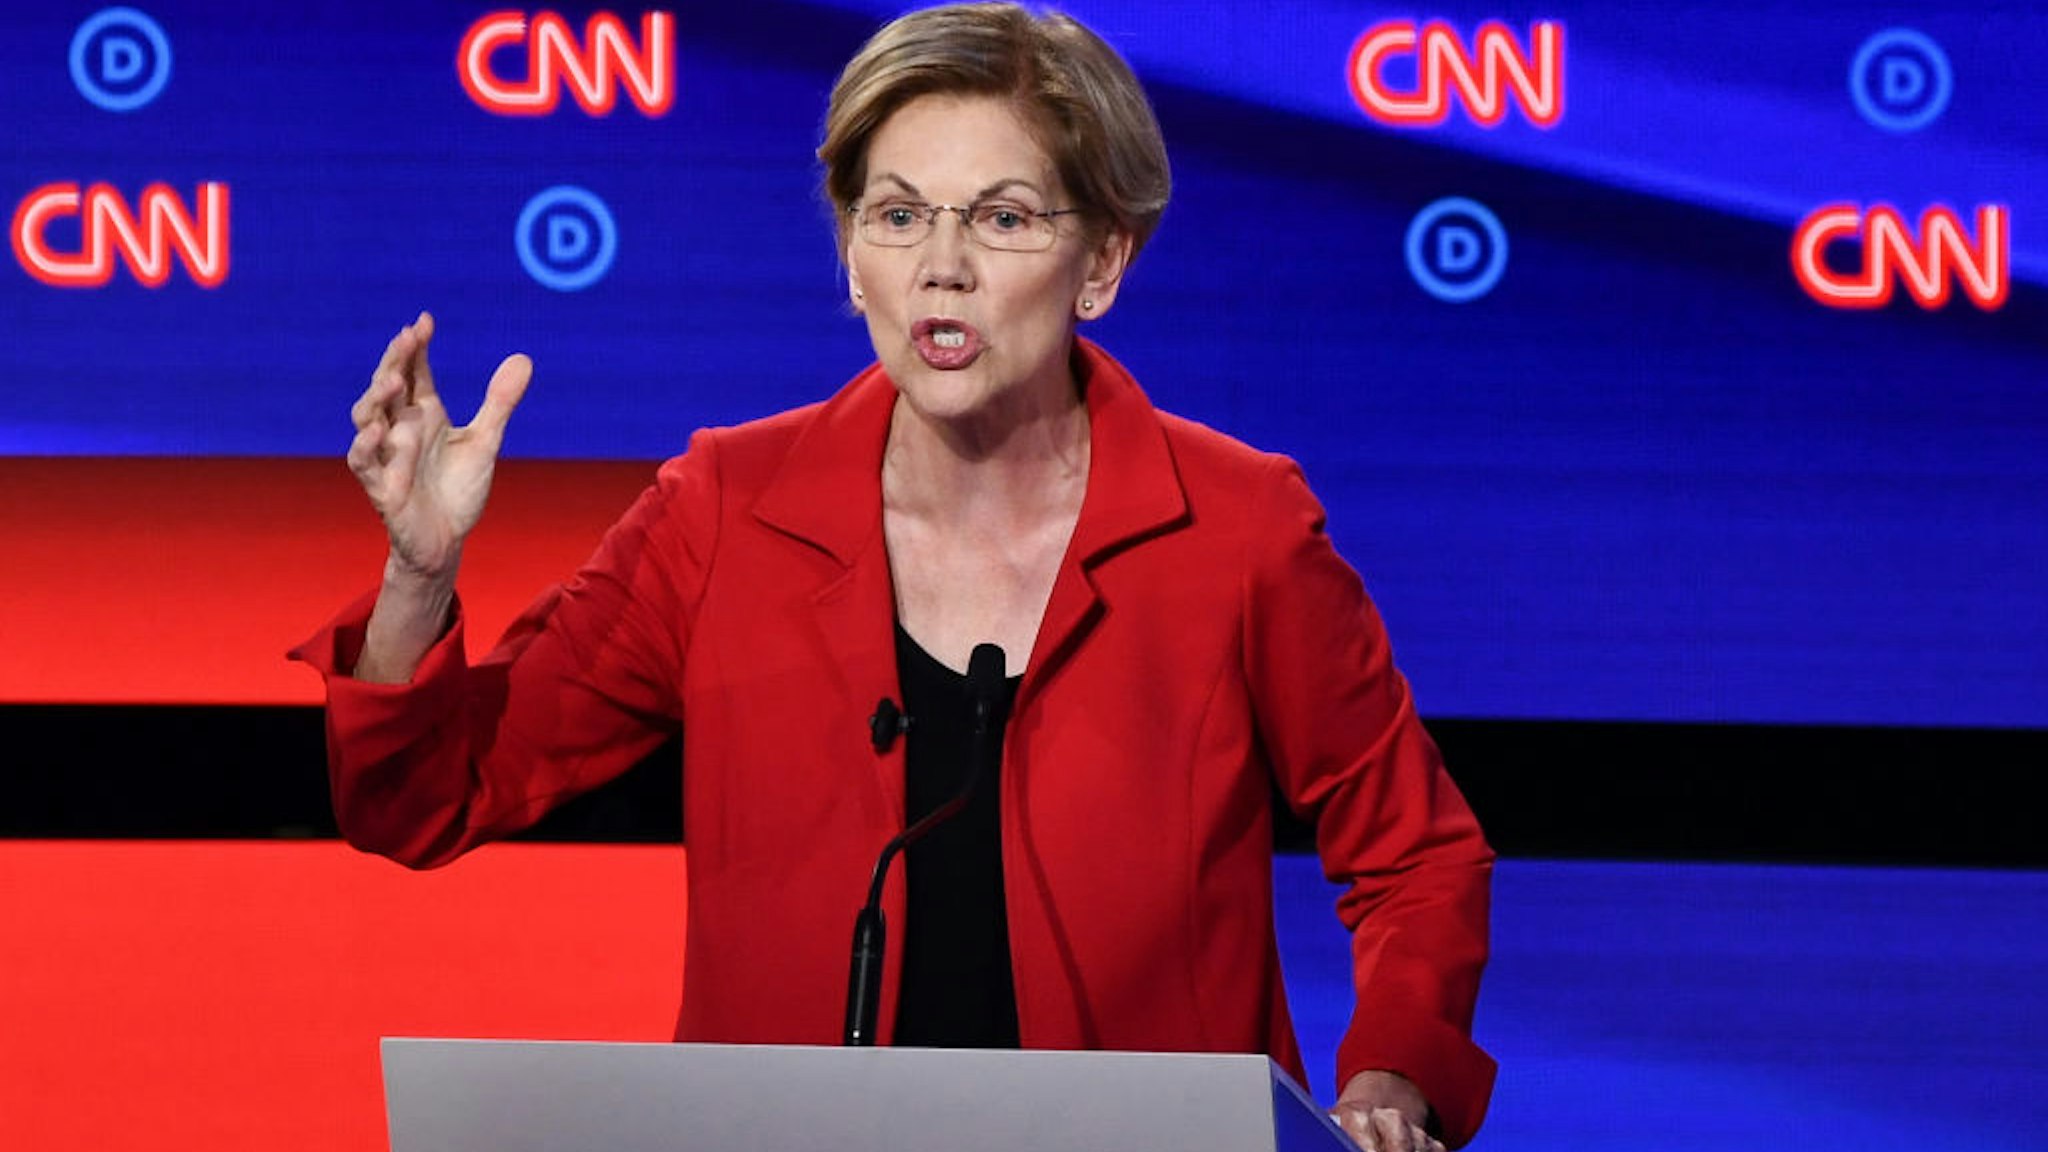 Democratic presidential hopeful US Senator from Massachusetts Elizabeth Warren participates in the first round of the second Democratic primary debate of the 2020 presidential campaign season hosted by CNN at the Fox Theatre in Detroit, Michigan on July 30, 2019. (Photo by Brendan Smialowski / AFP) / ALTERNATIVE CROP (Photo credit should read BRENDAN SMIALOWSKI/AFP/Getty Images)